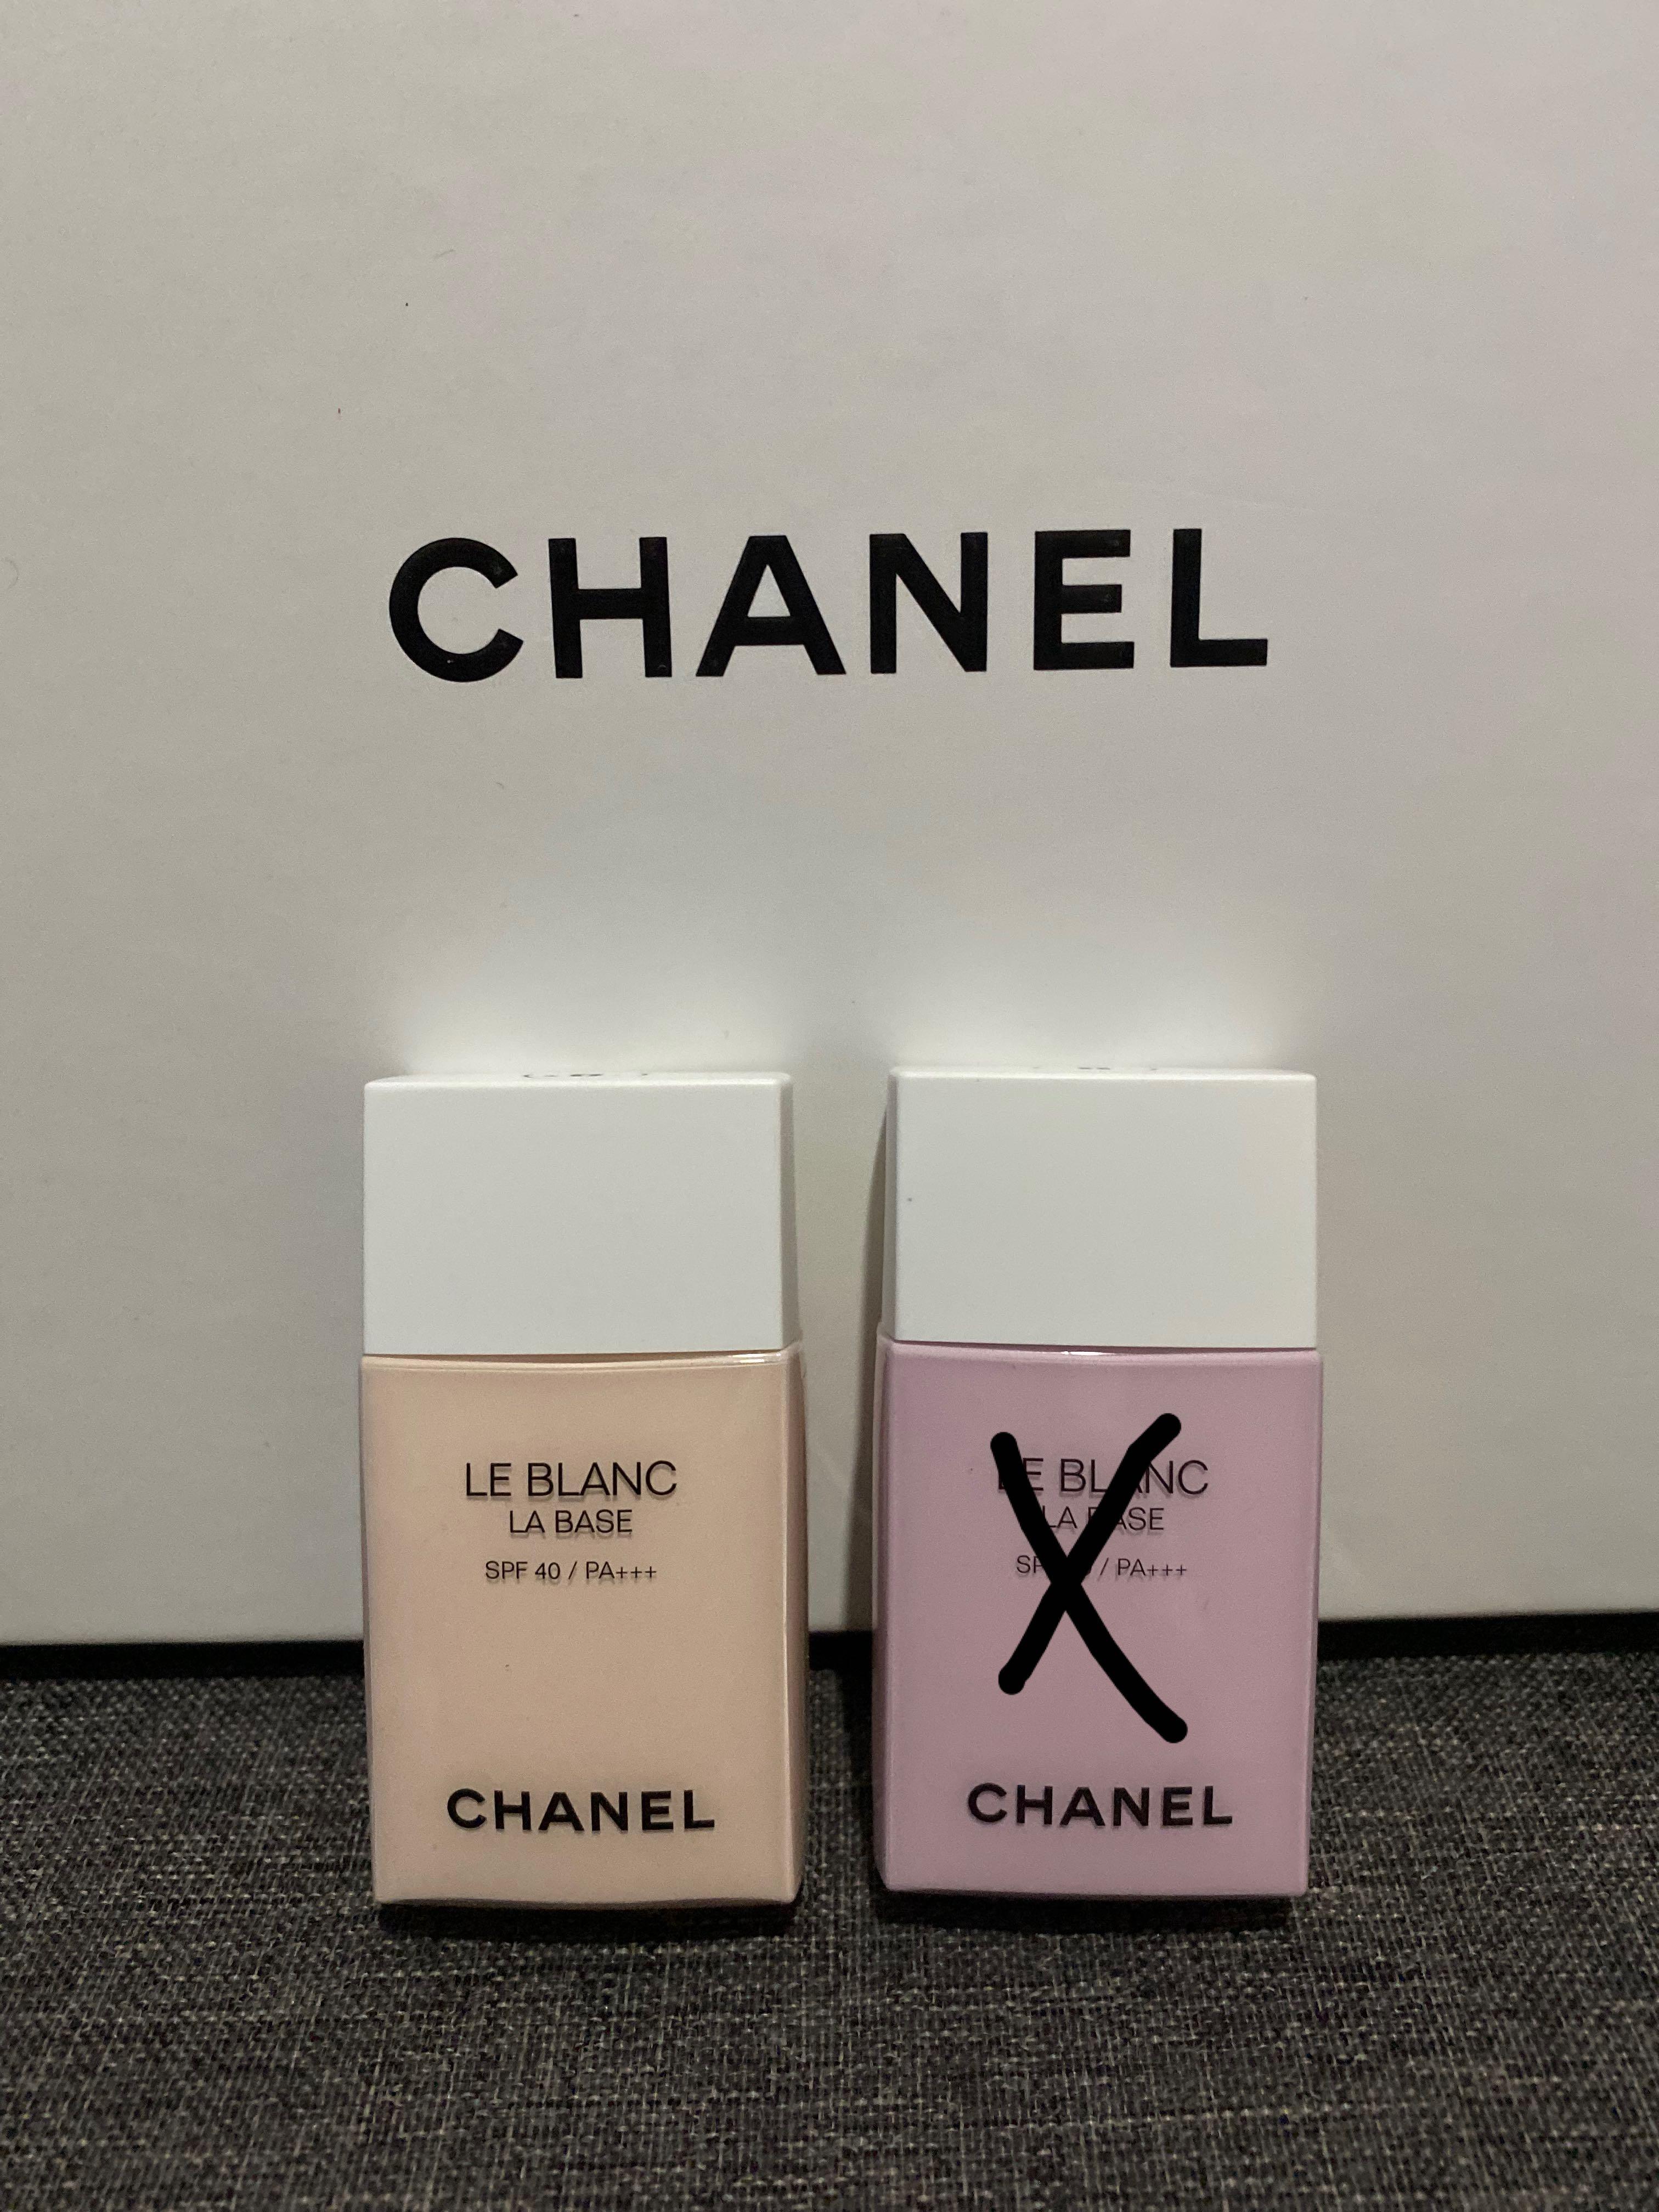 Chanel Le Blanc Light Creator Brightening Makeup Base Review 